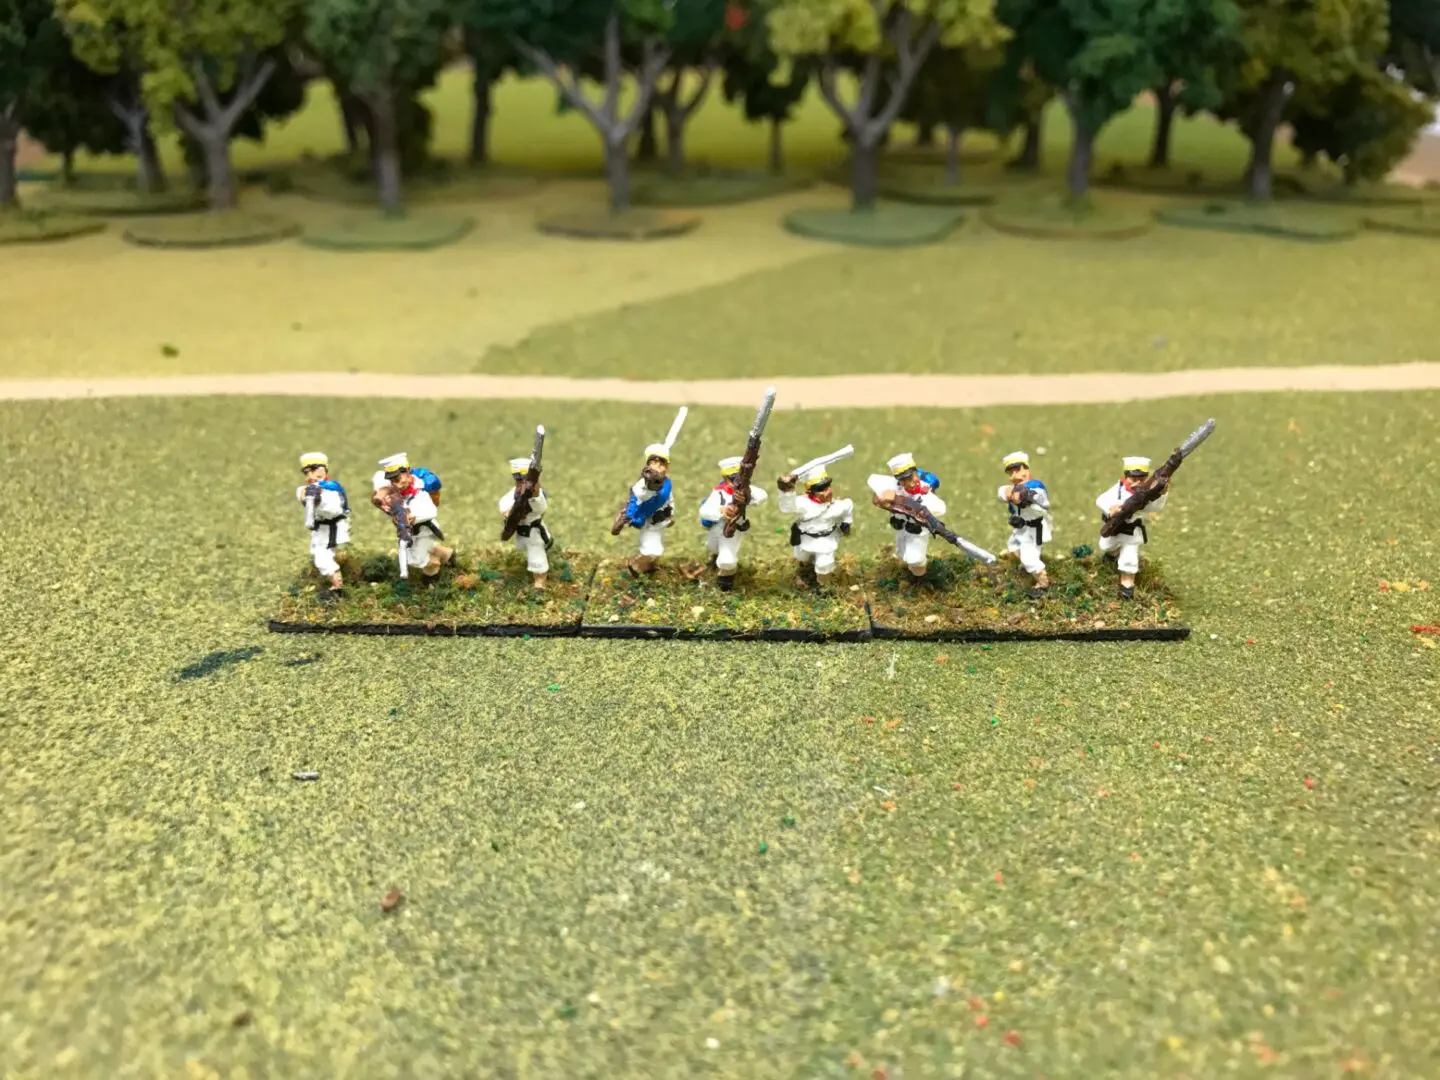 Japanese Infantry With Command